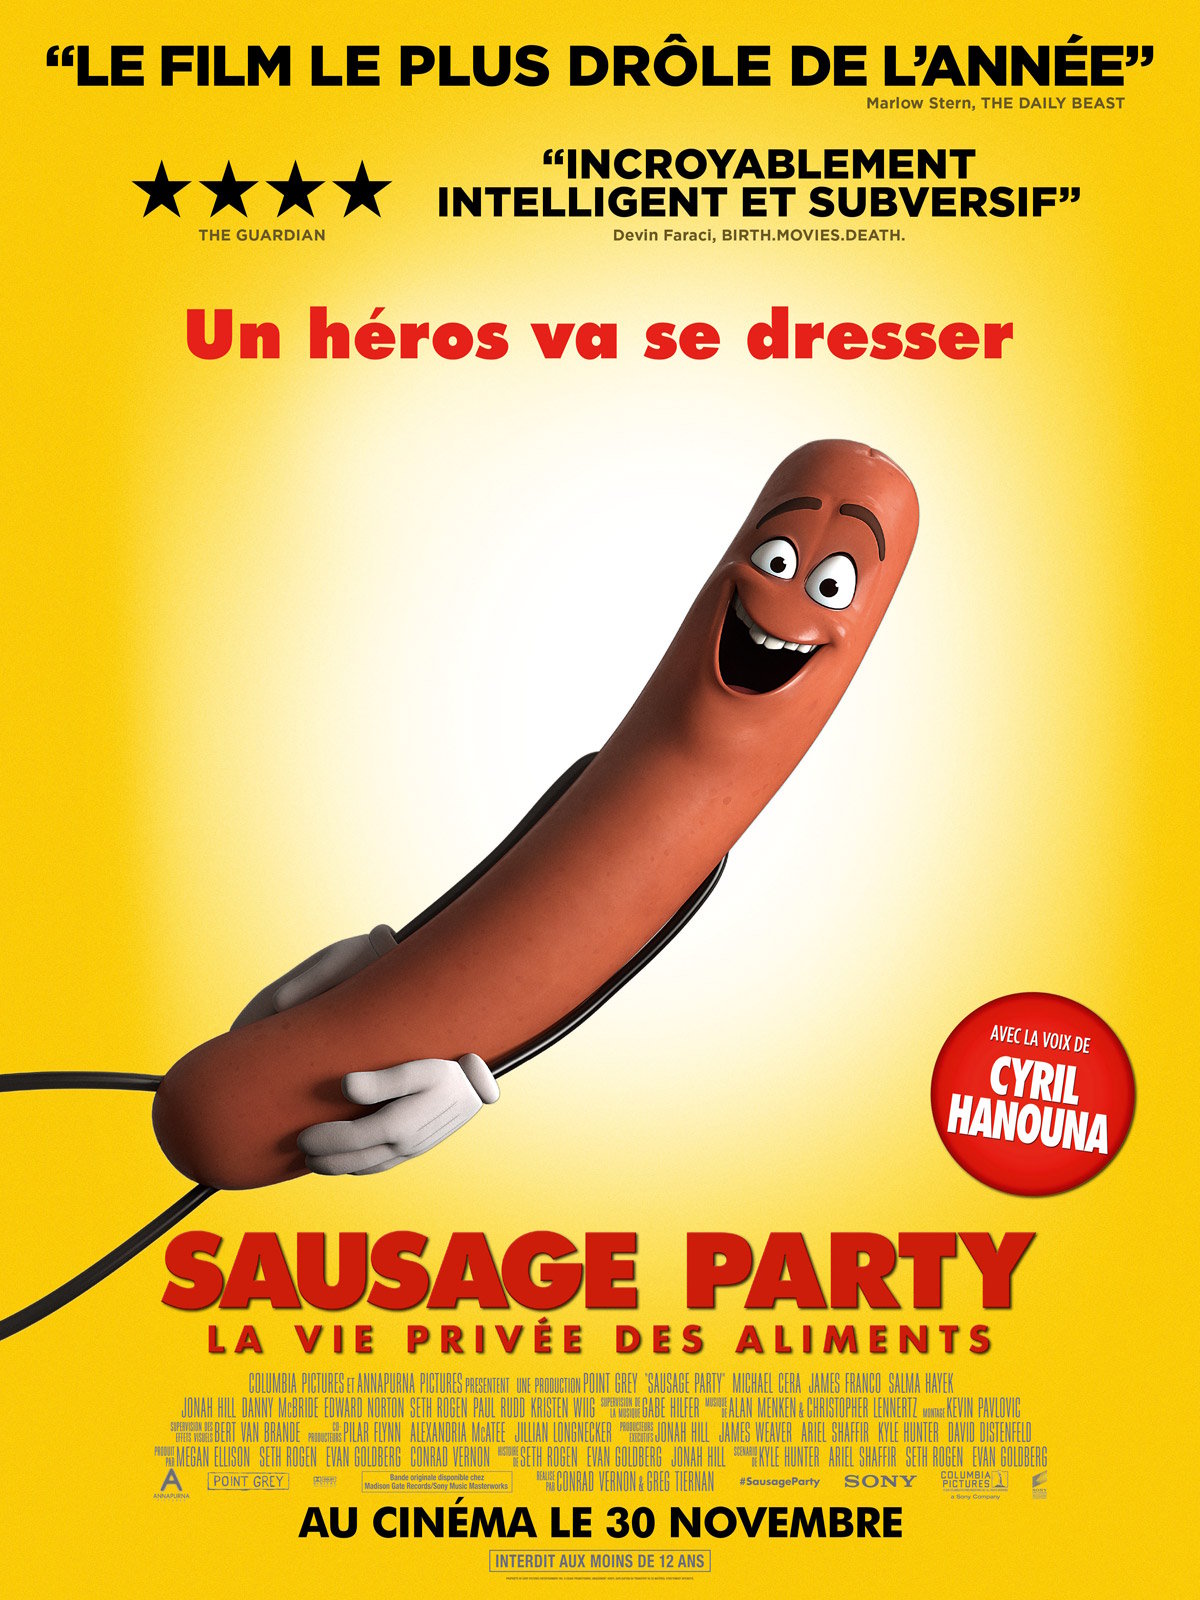 Sausage Party streaming vf gratuit